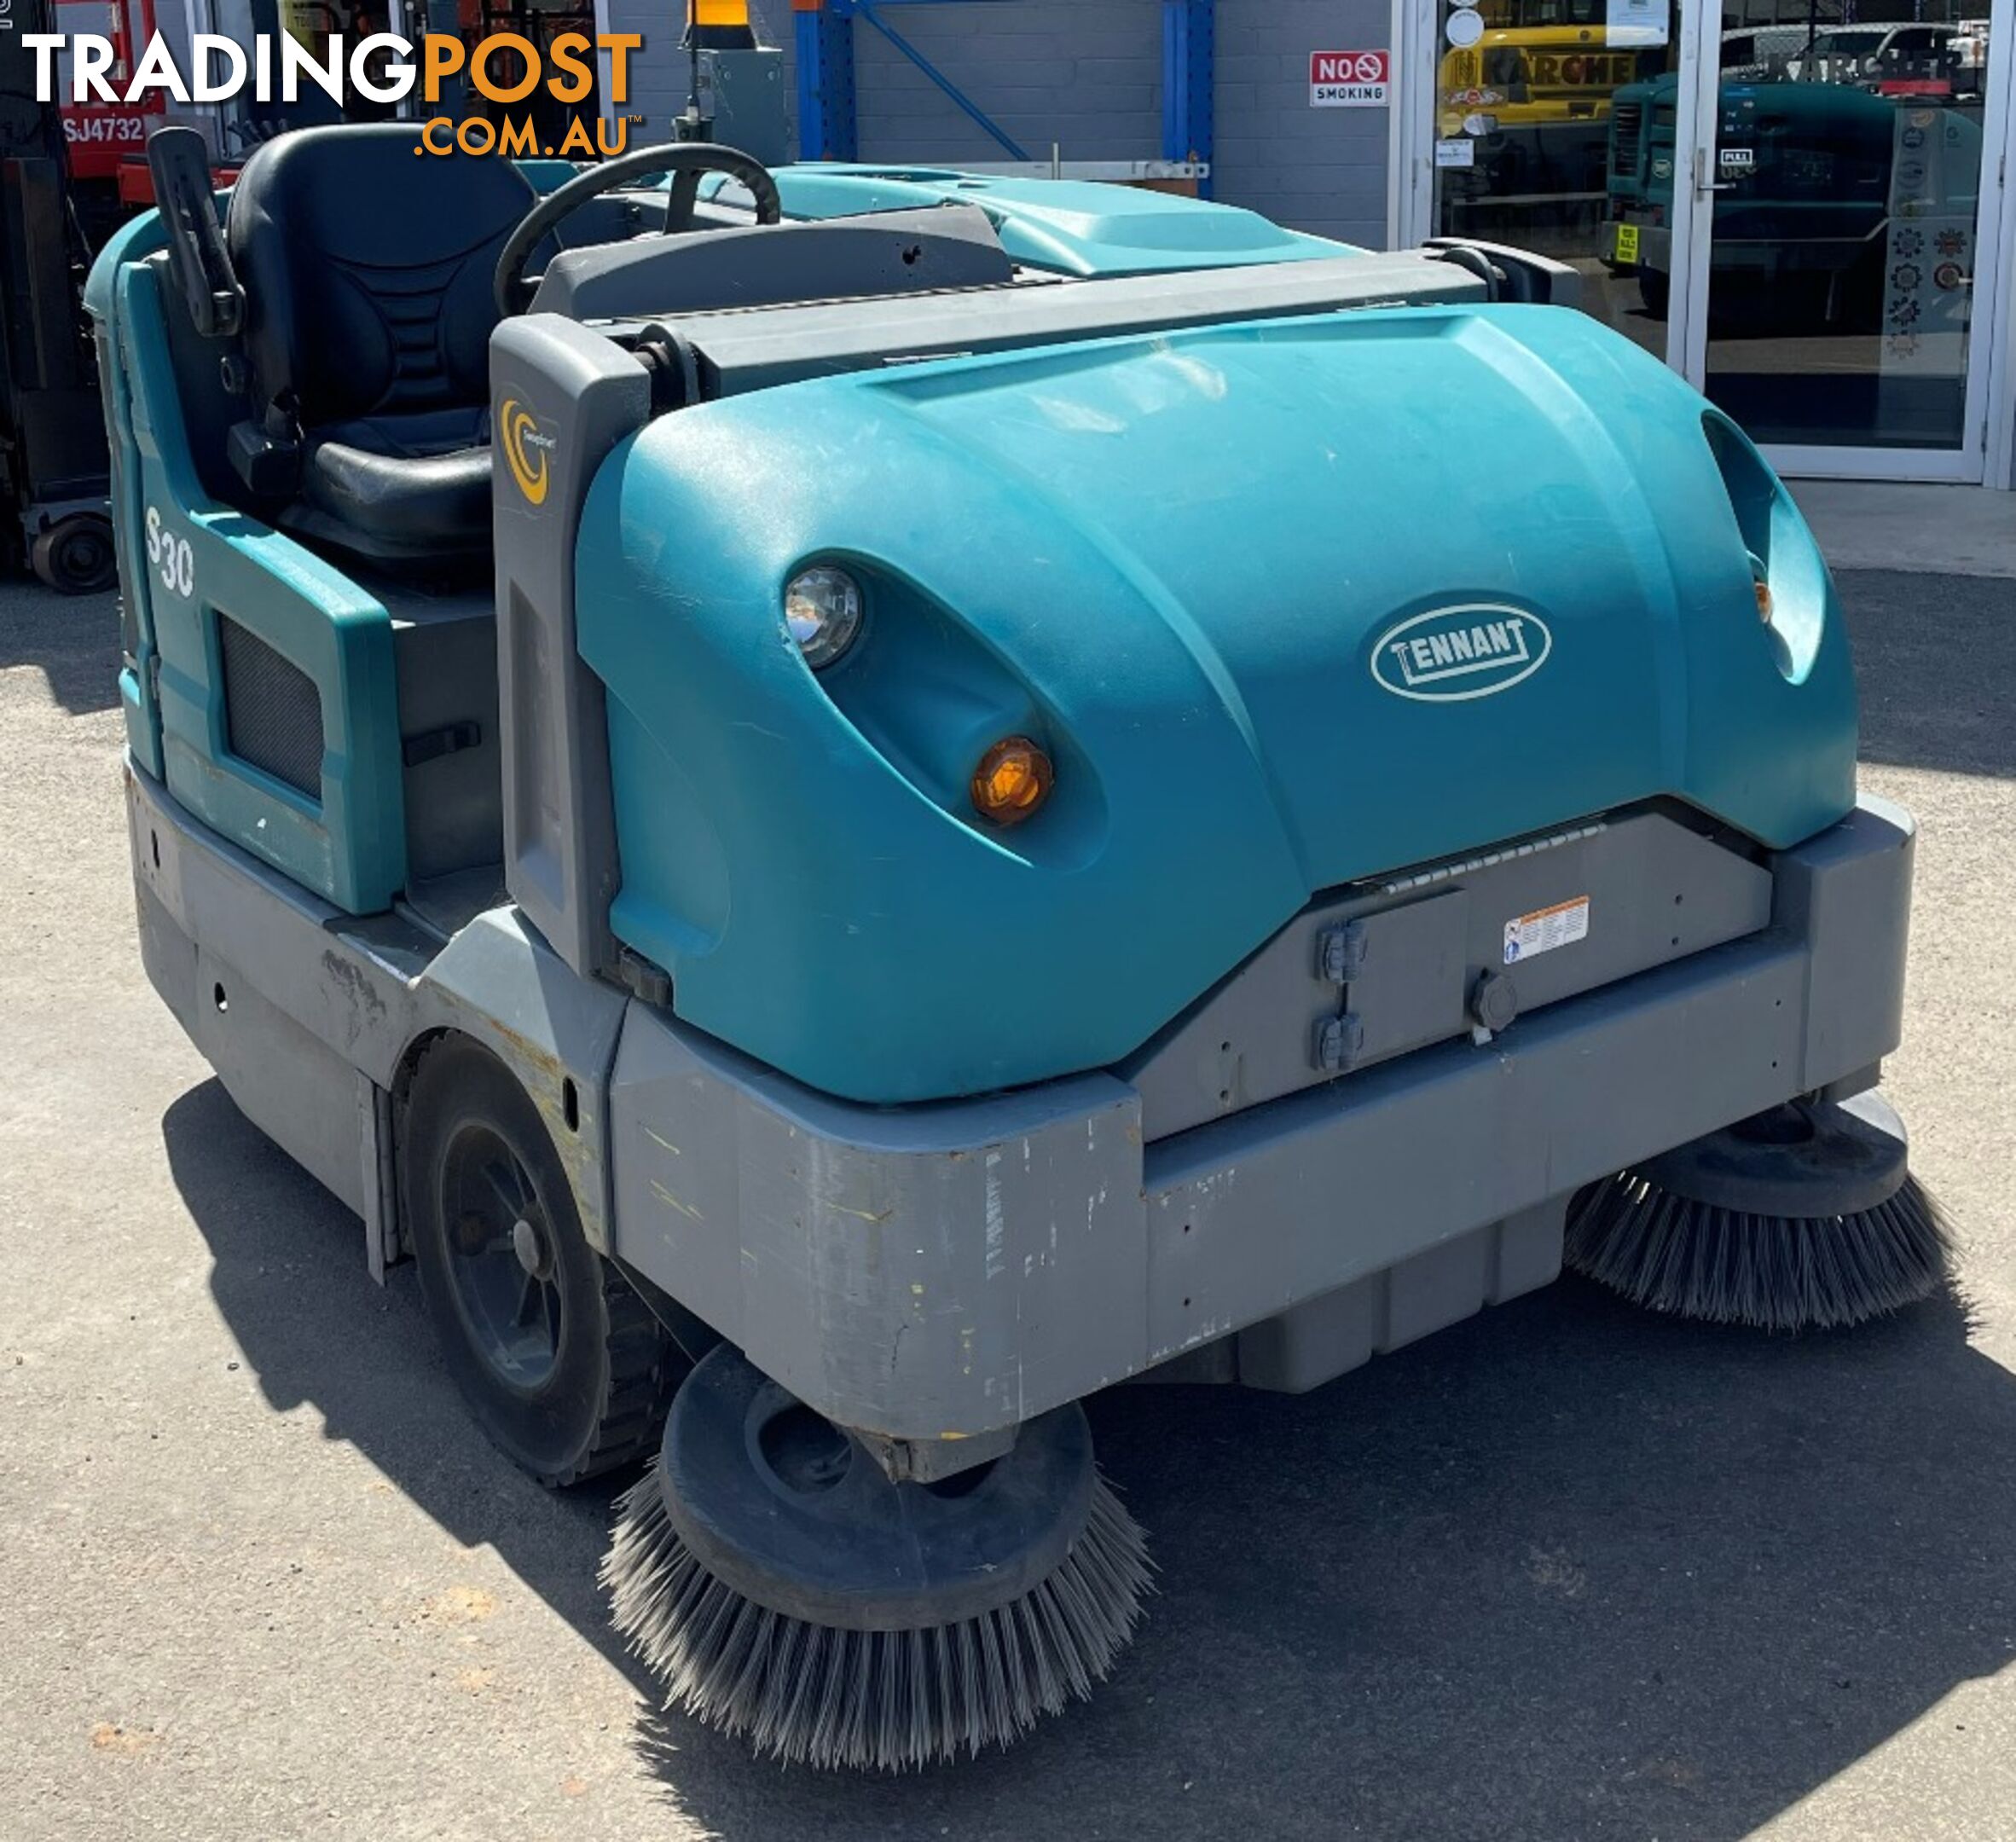 Used S30 Ride-On Sweeper For Sale